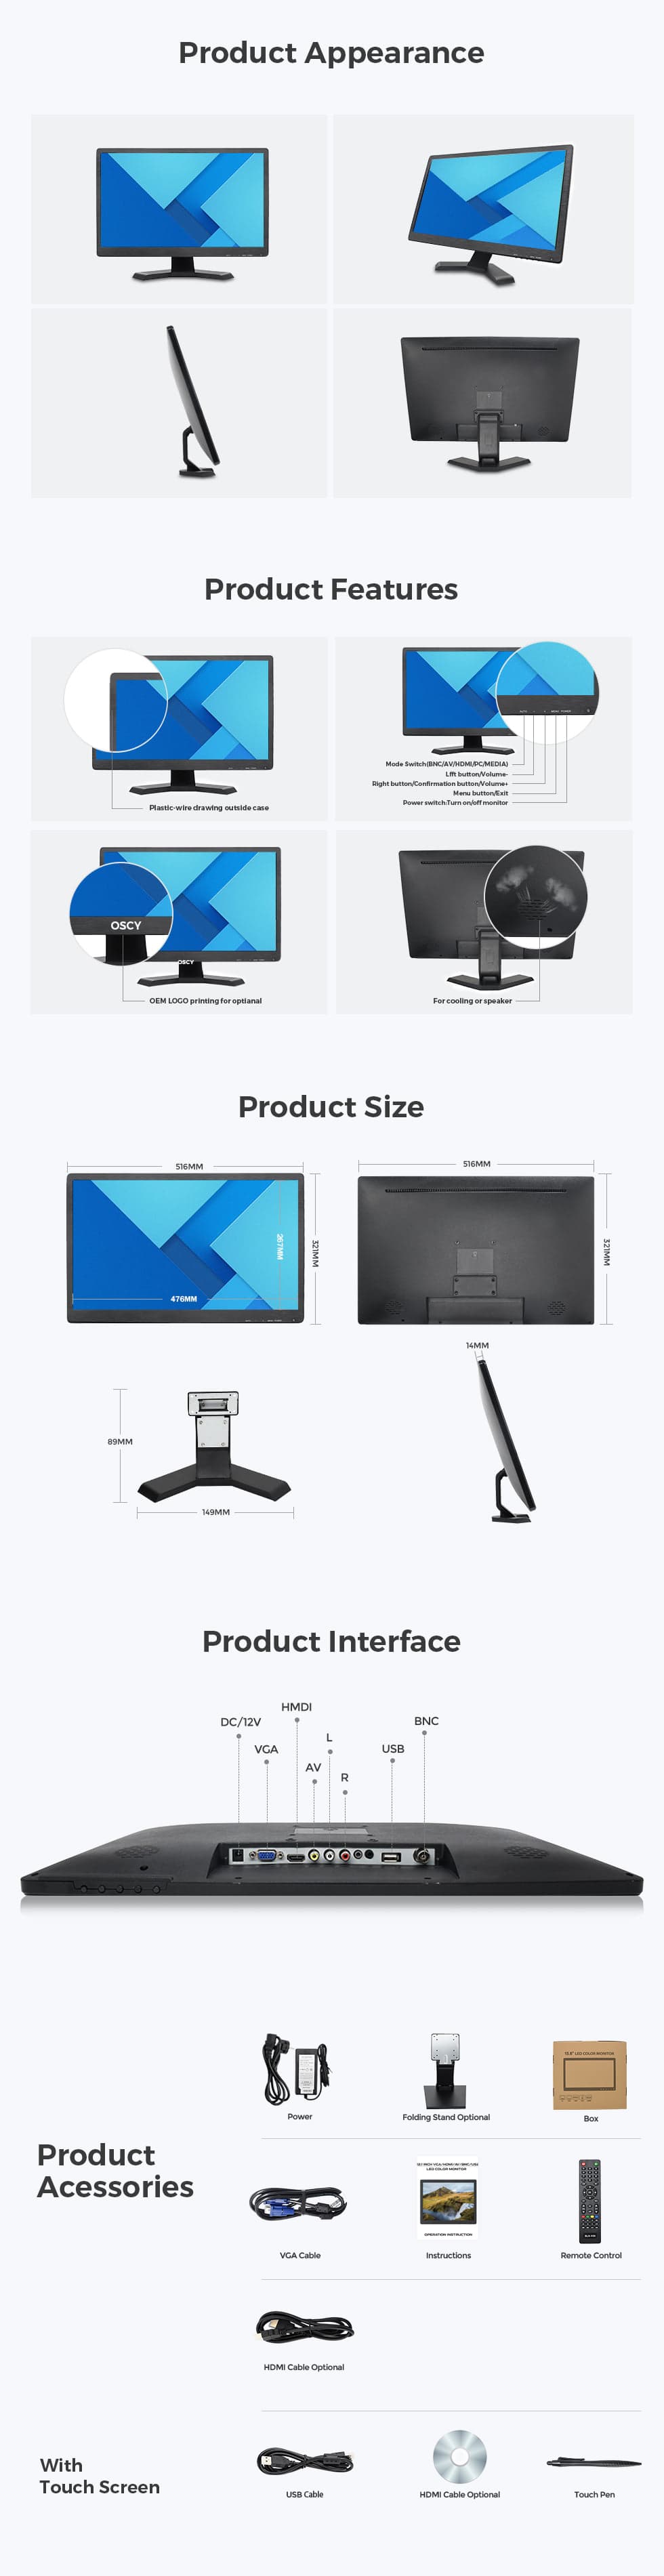 22 Inch Touch Screen Monitor Supplier